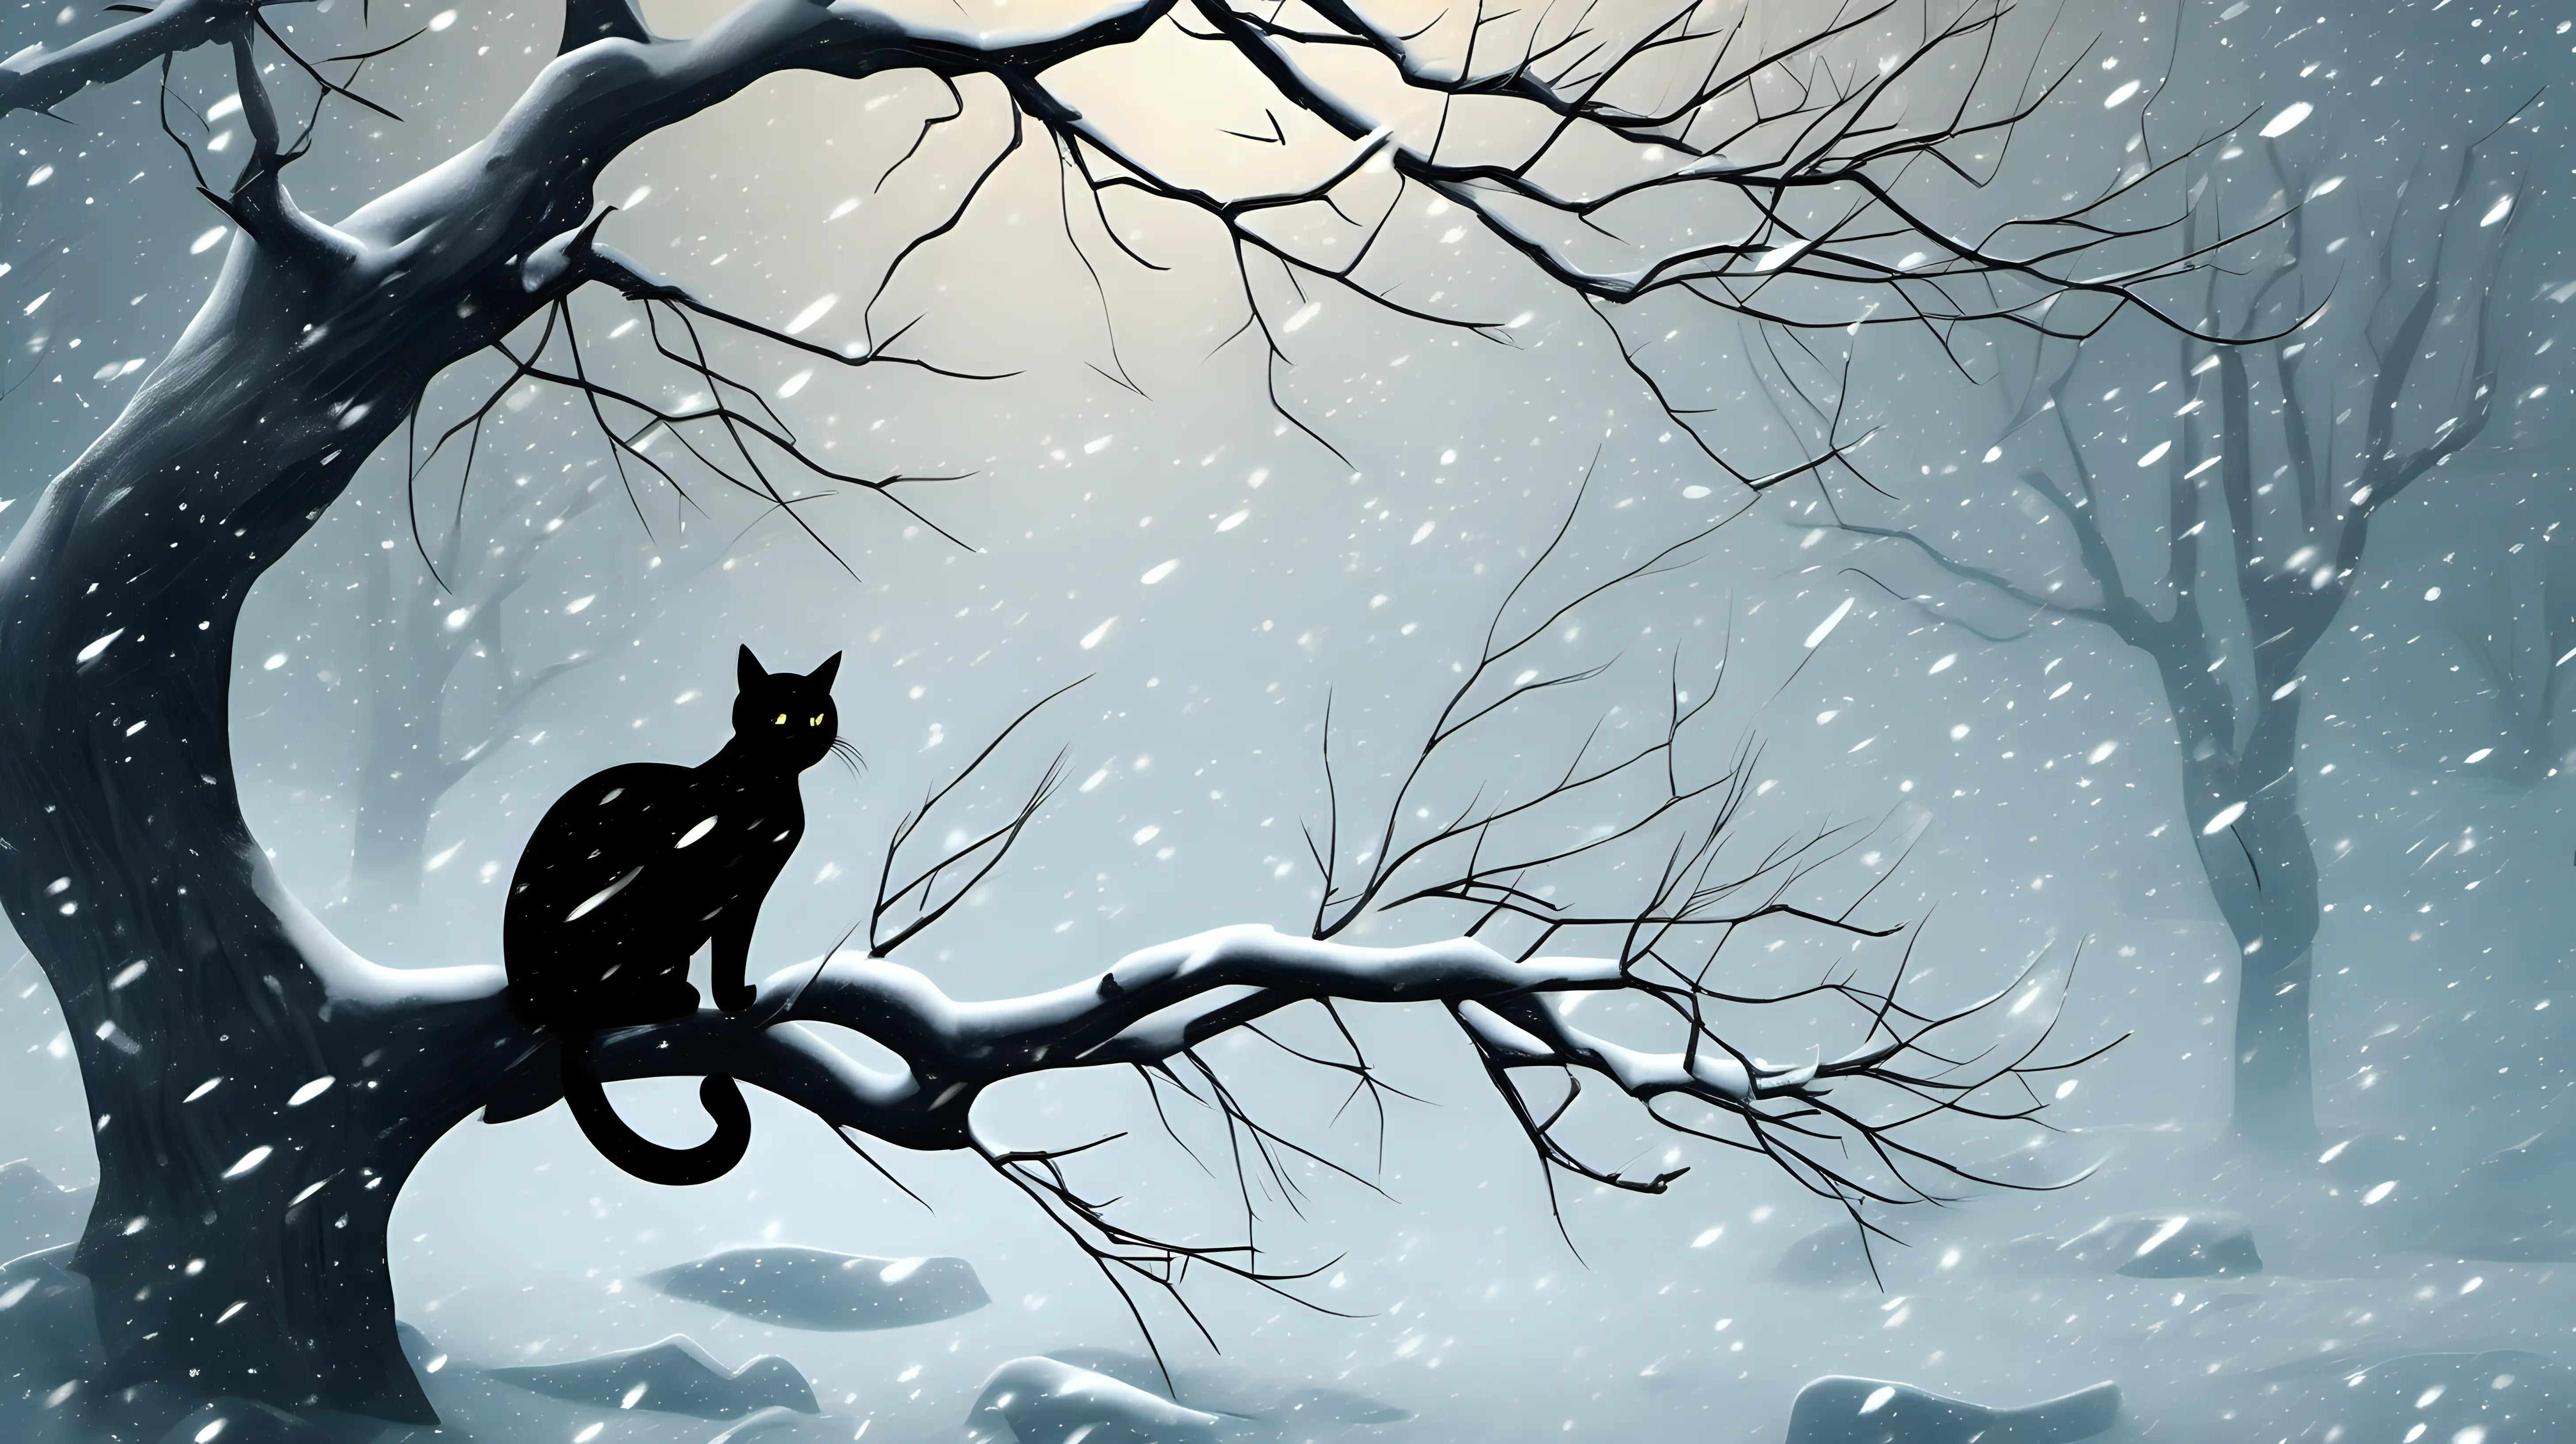 "Design a somber scene of a cat sitting on a branch of a leafless tree in winter, with snowflakes falling gently around, capturing the essence of solitude in the cold season."